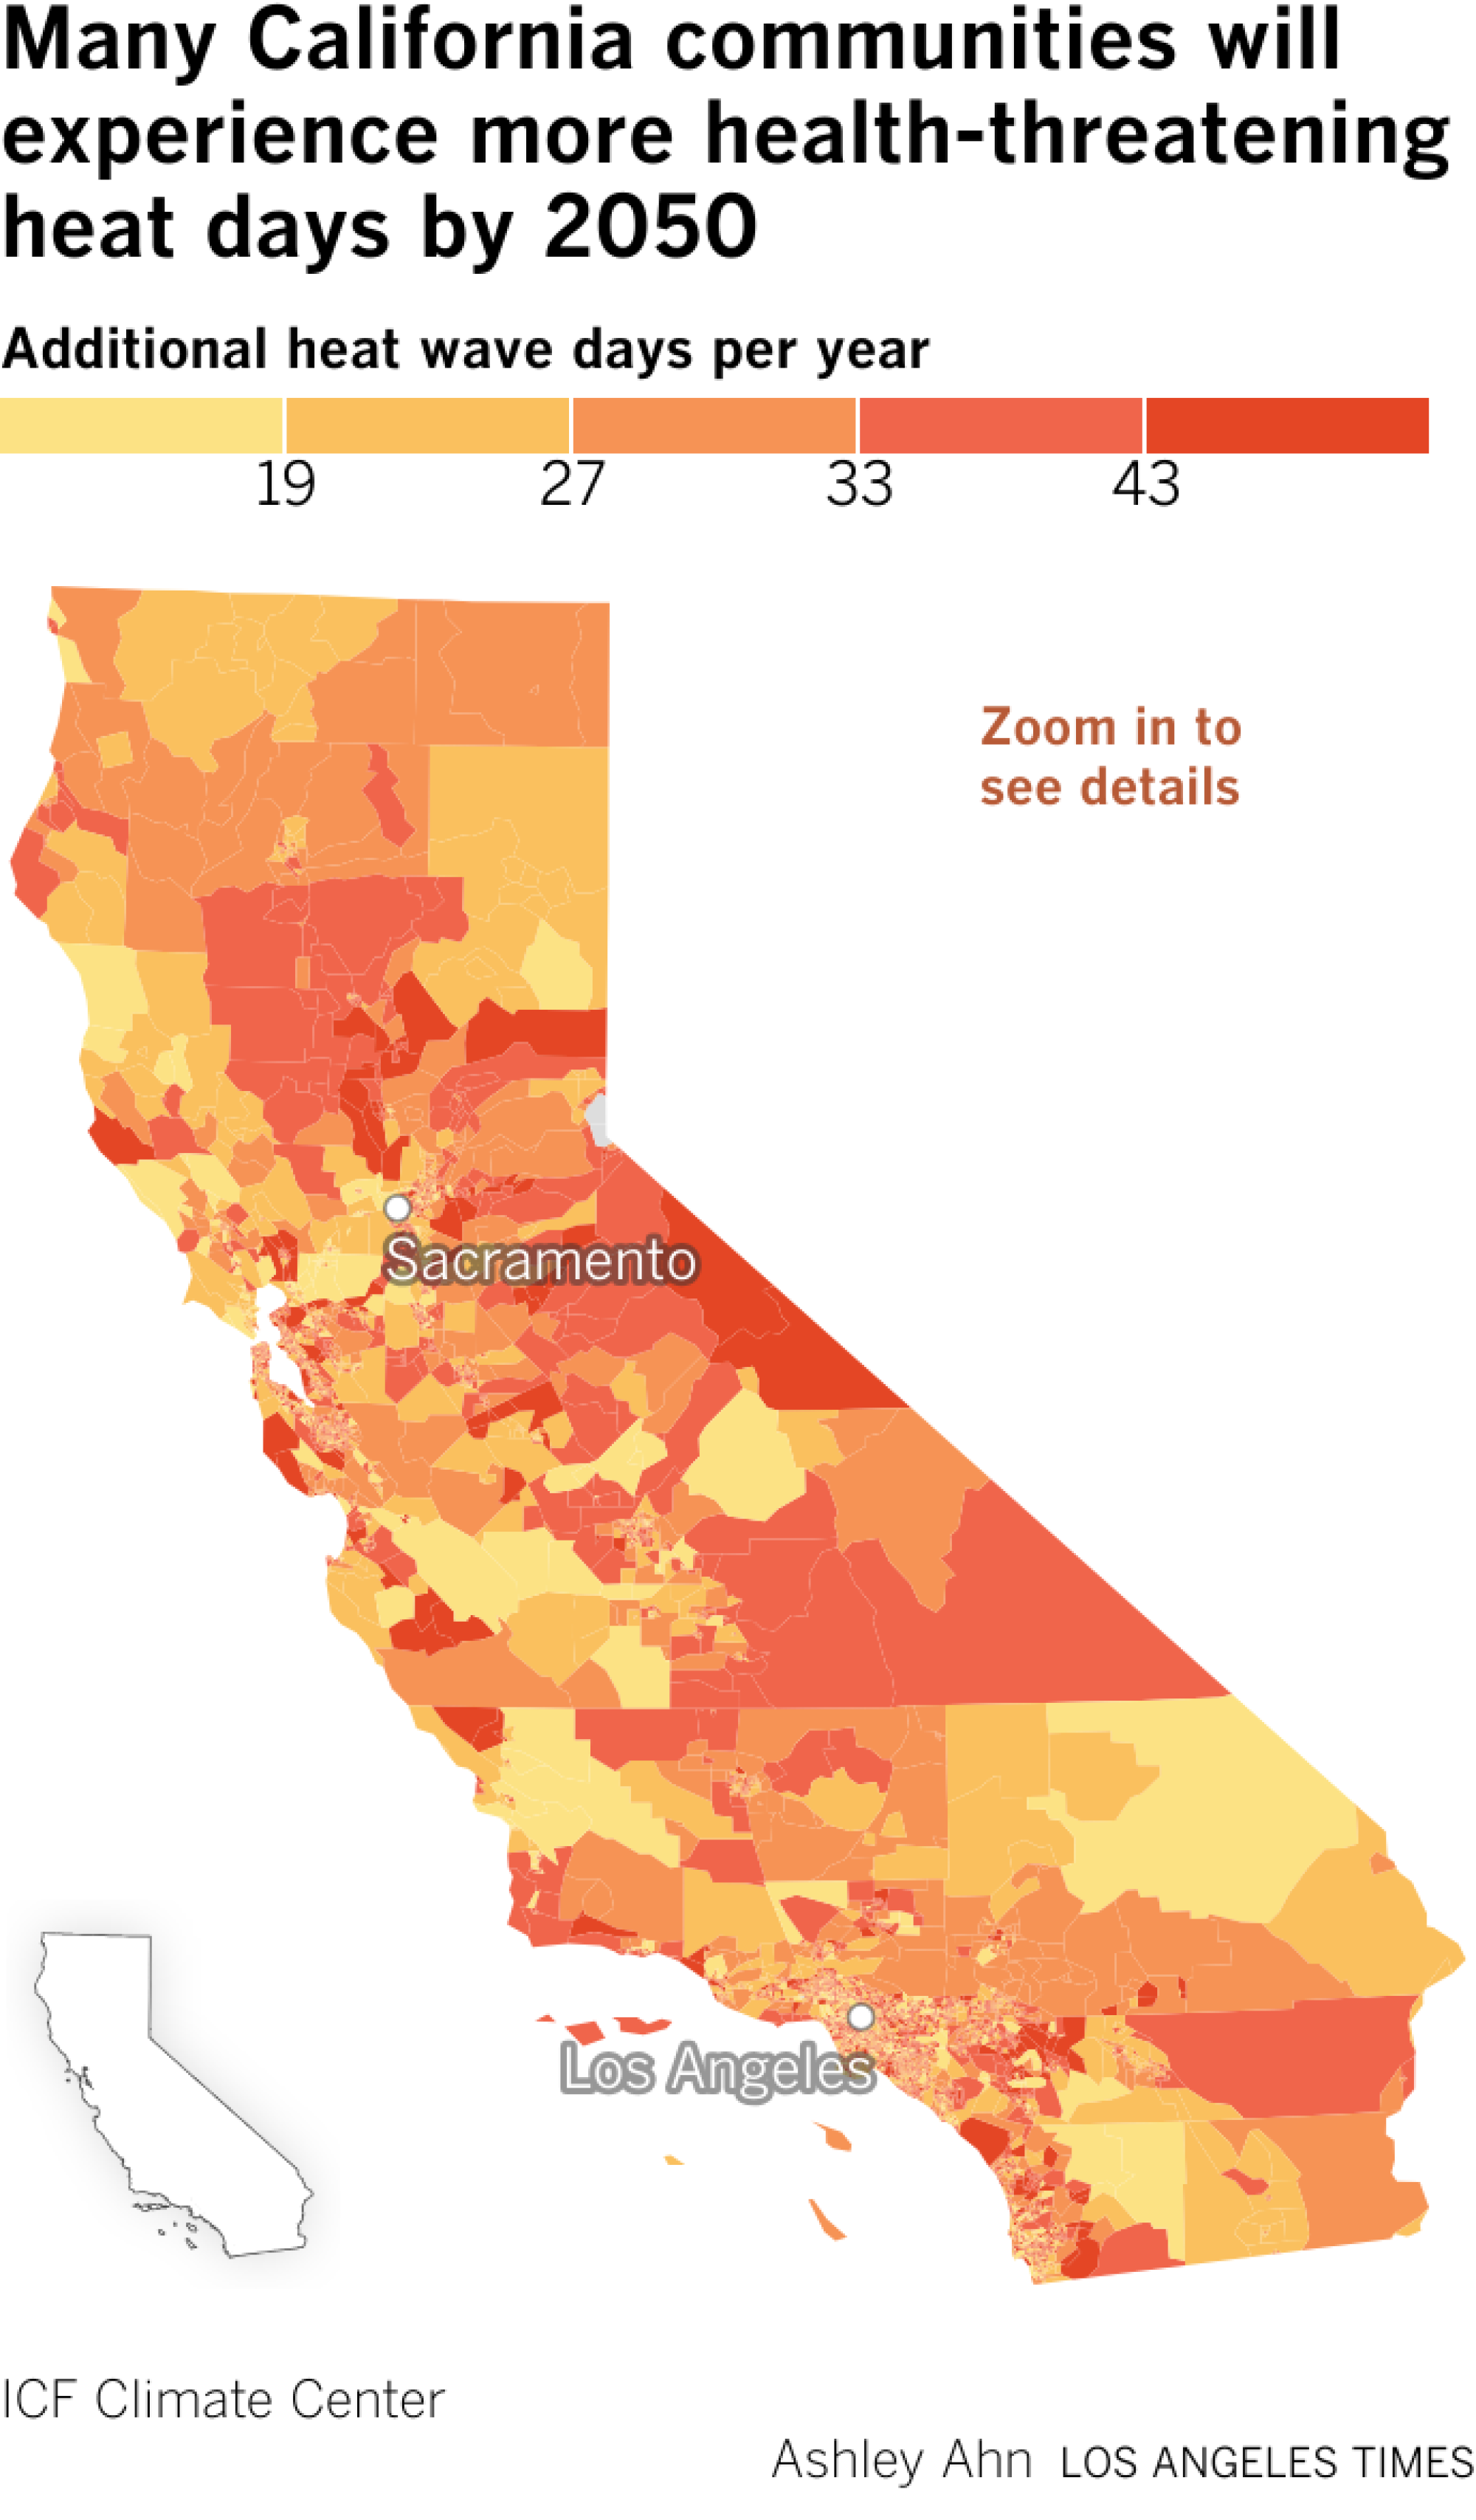 Choropleth map of the number of additional heatwave days per year in California by 2050 